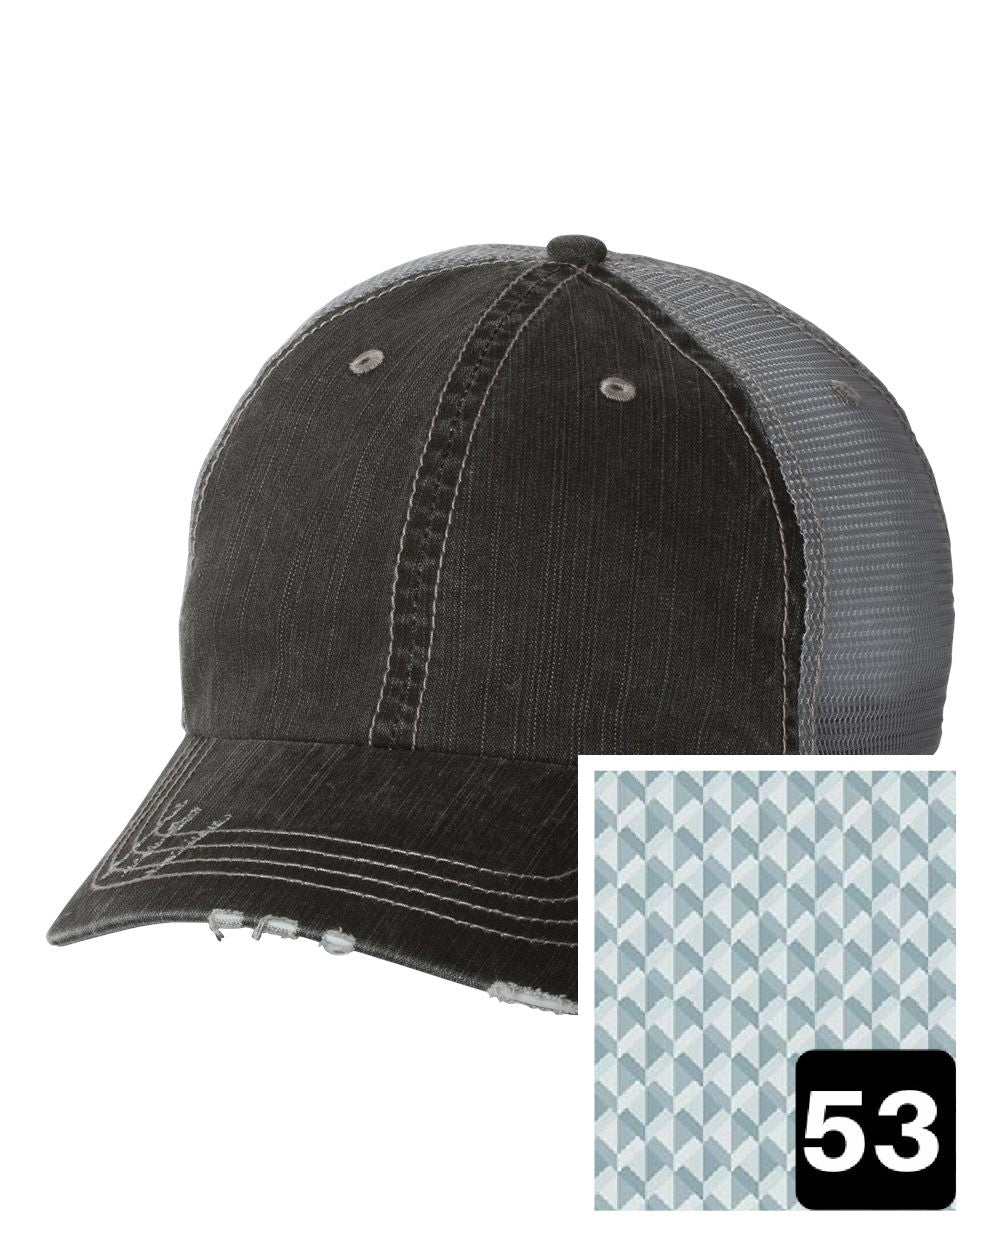 gray distressed trucker hat with multi-color stripe fabric state of Arkansas